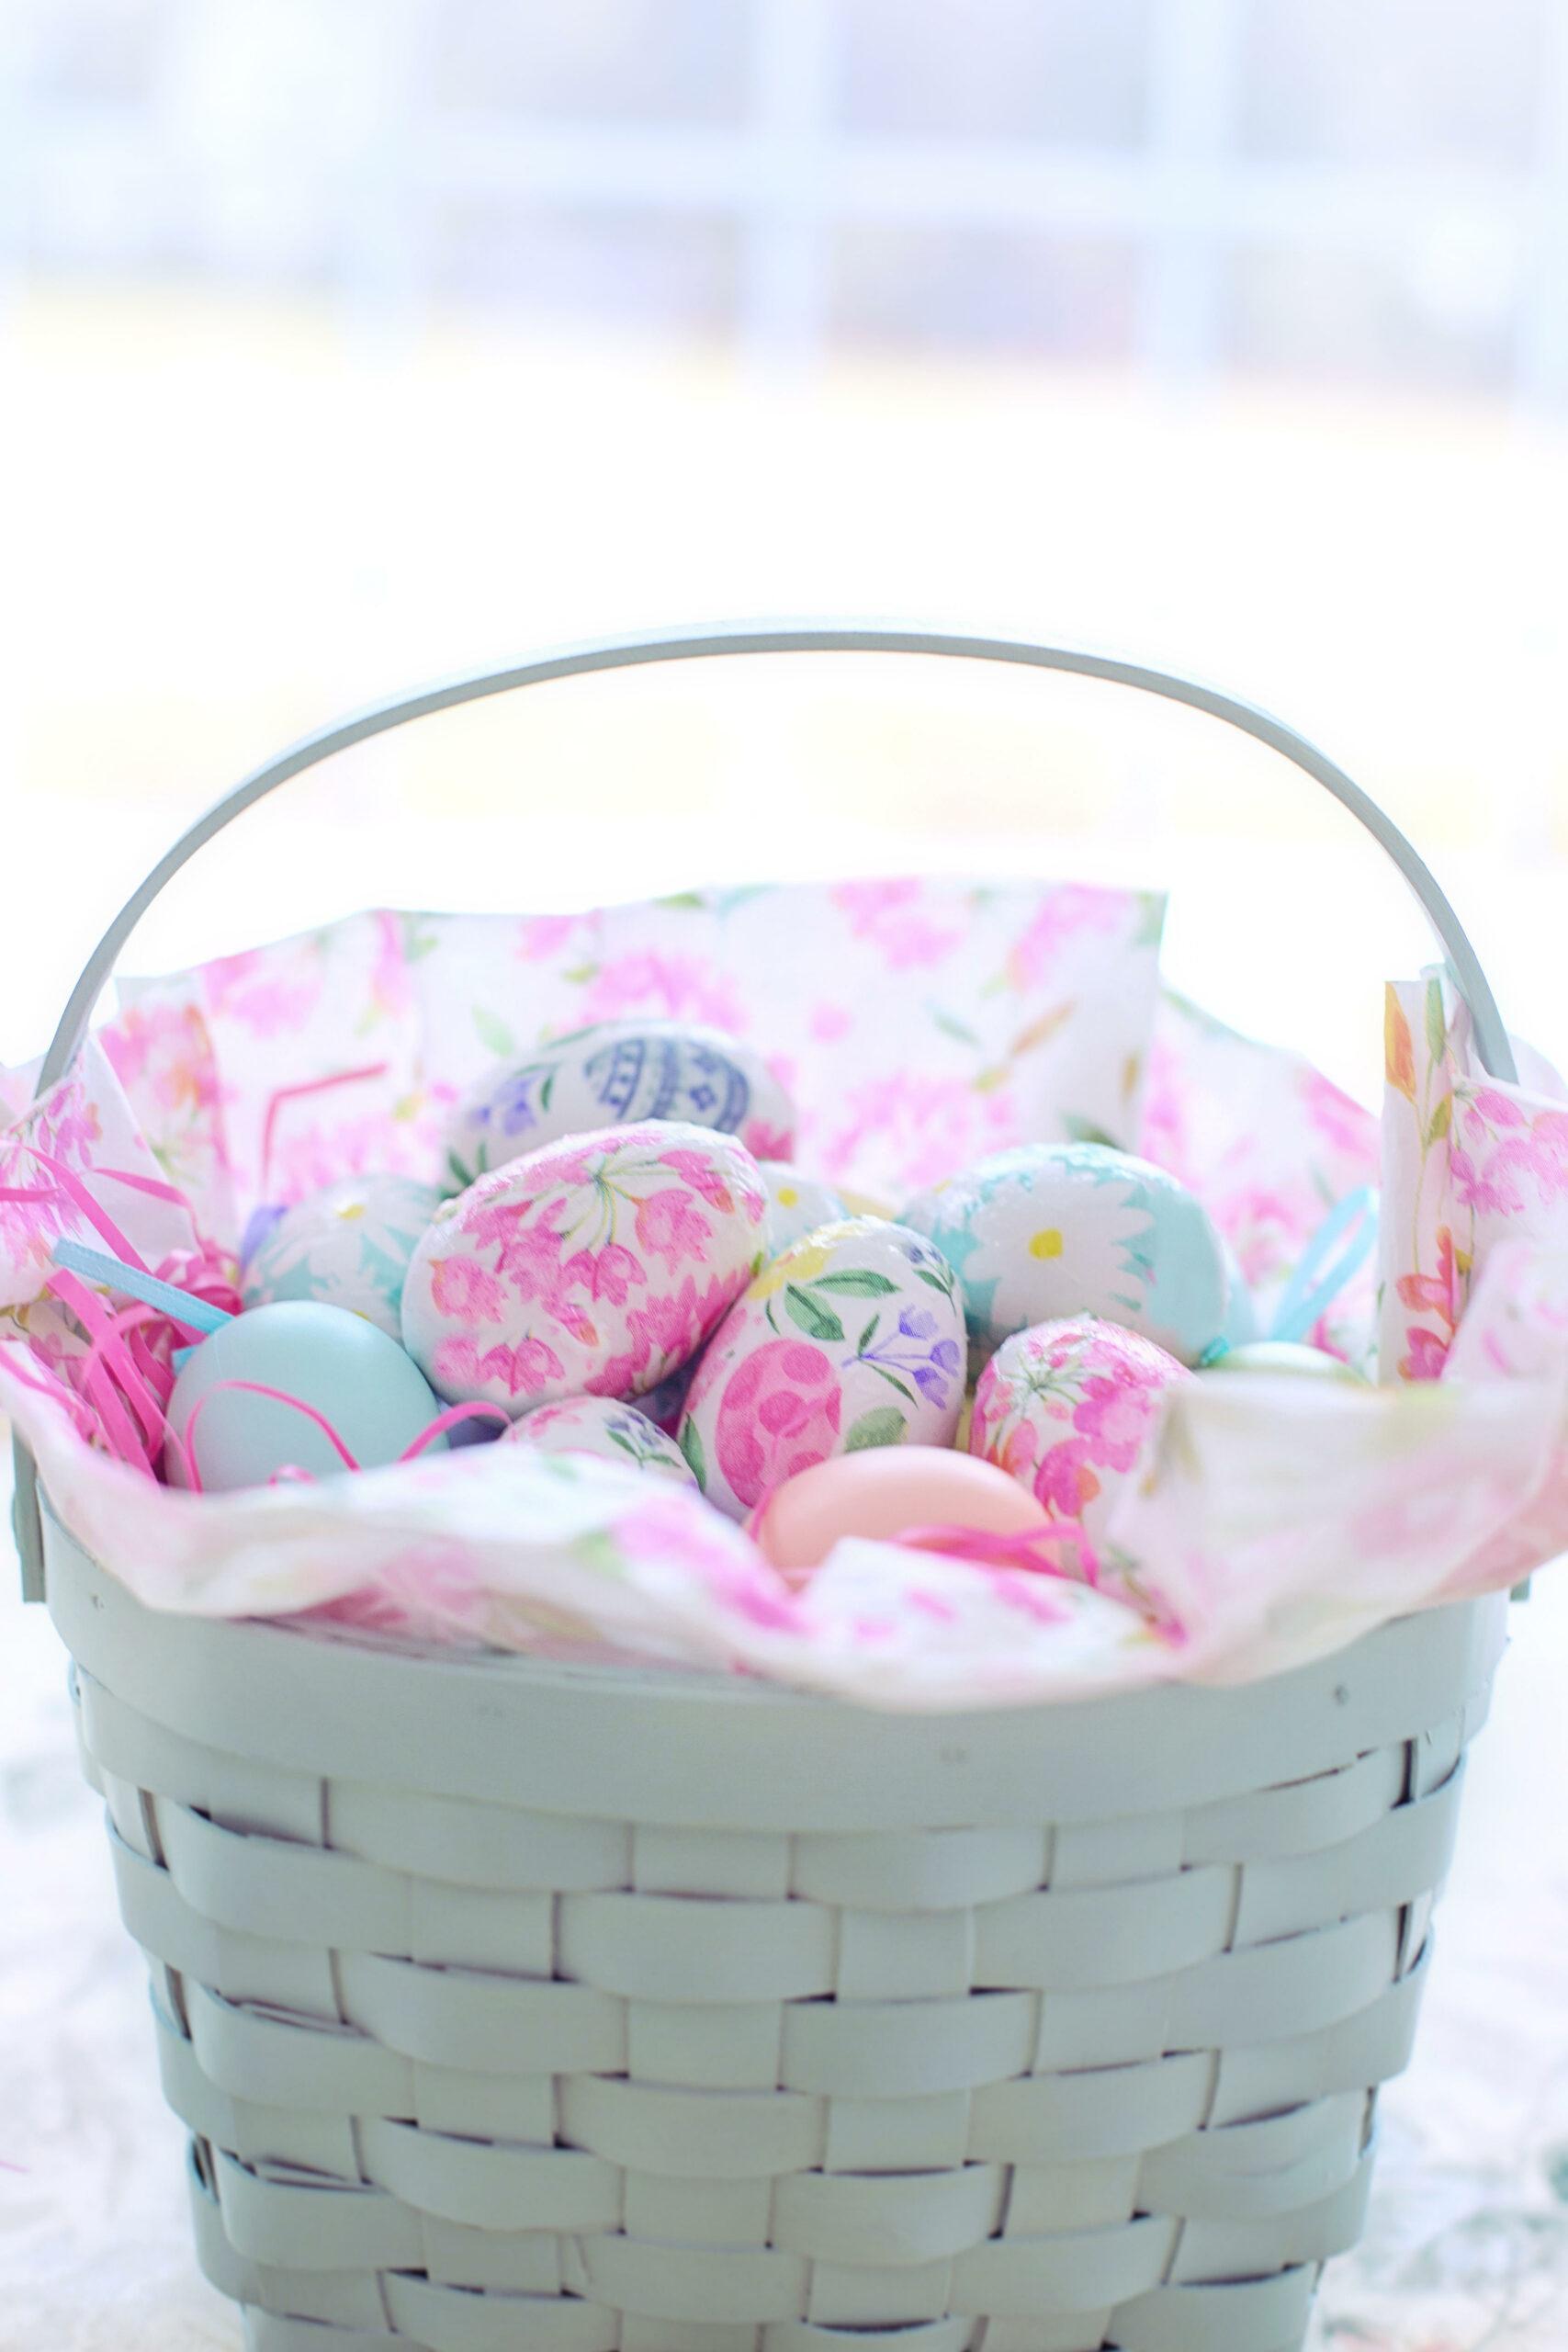 Hand-painted Easter eggs in a light blue Easter basket